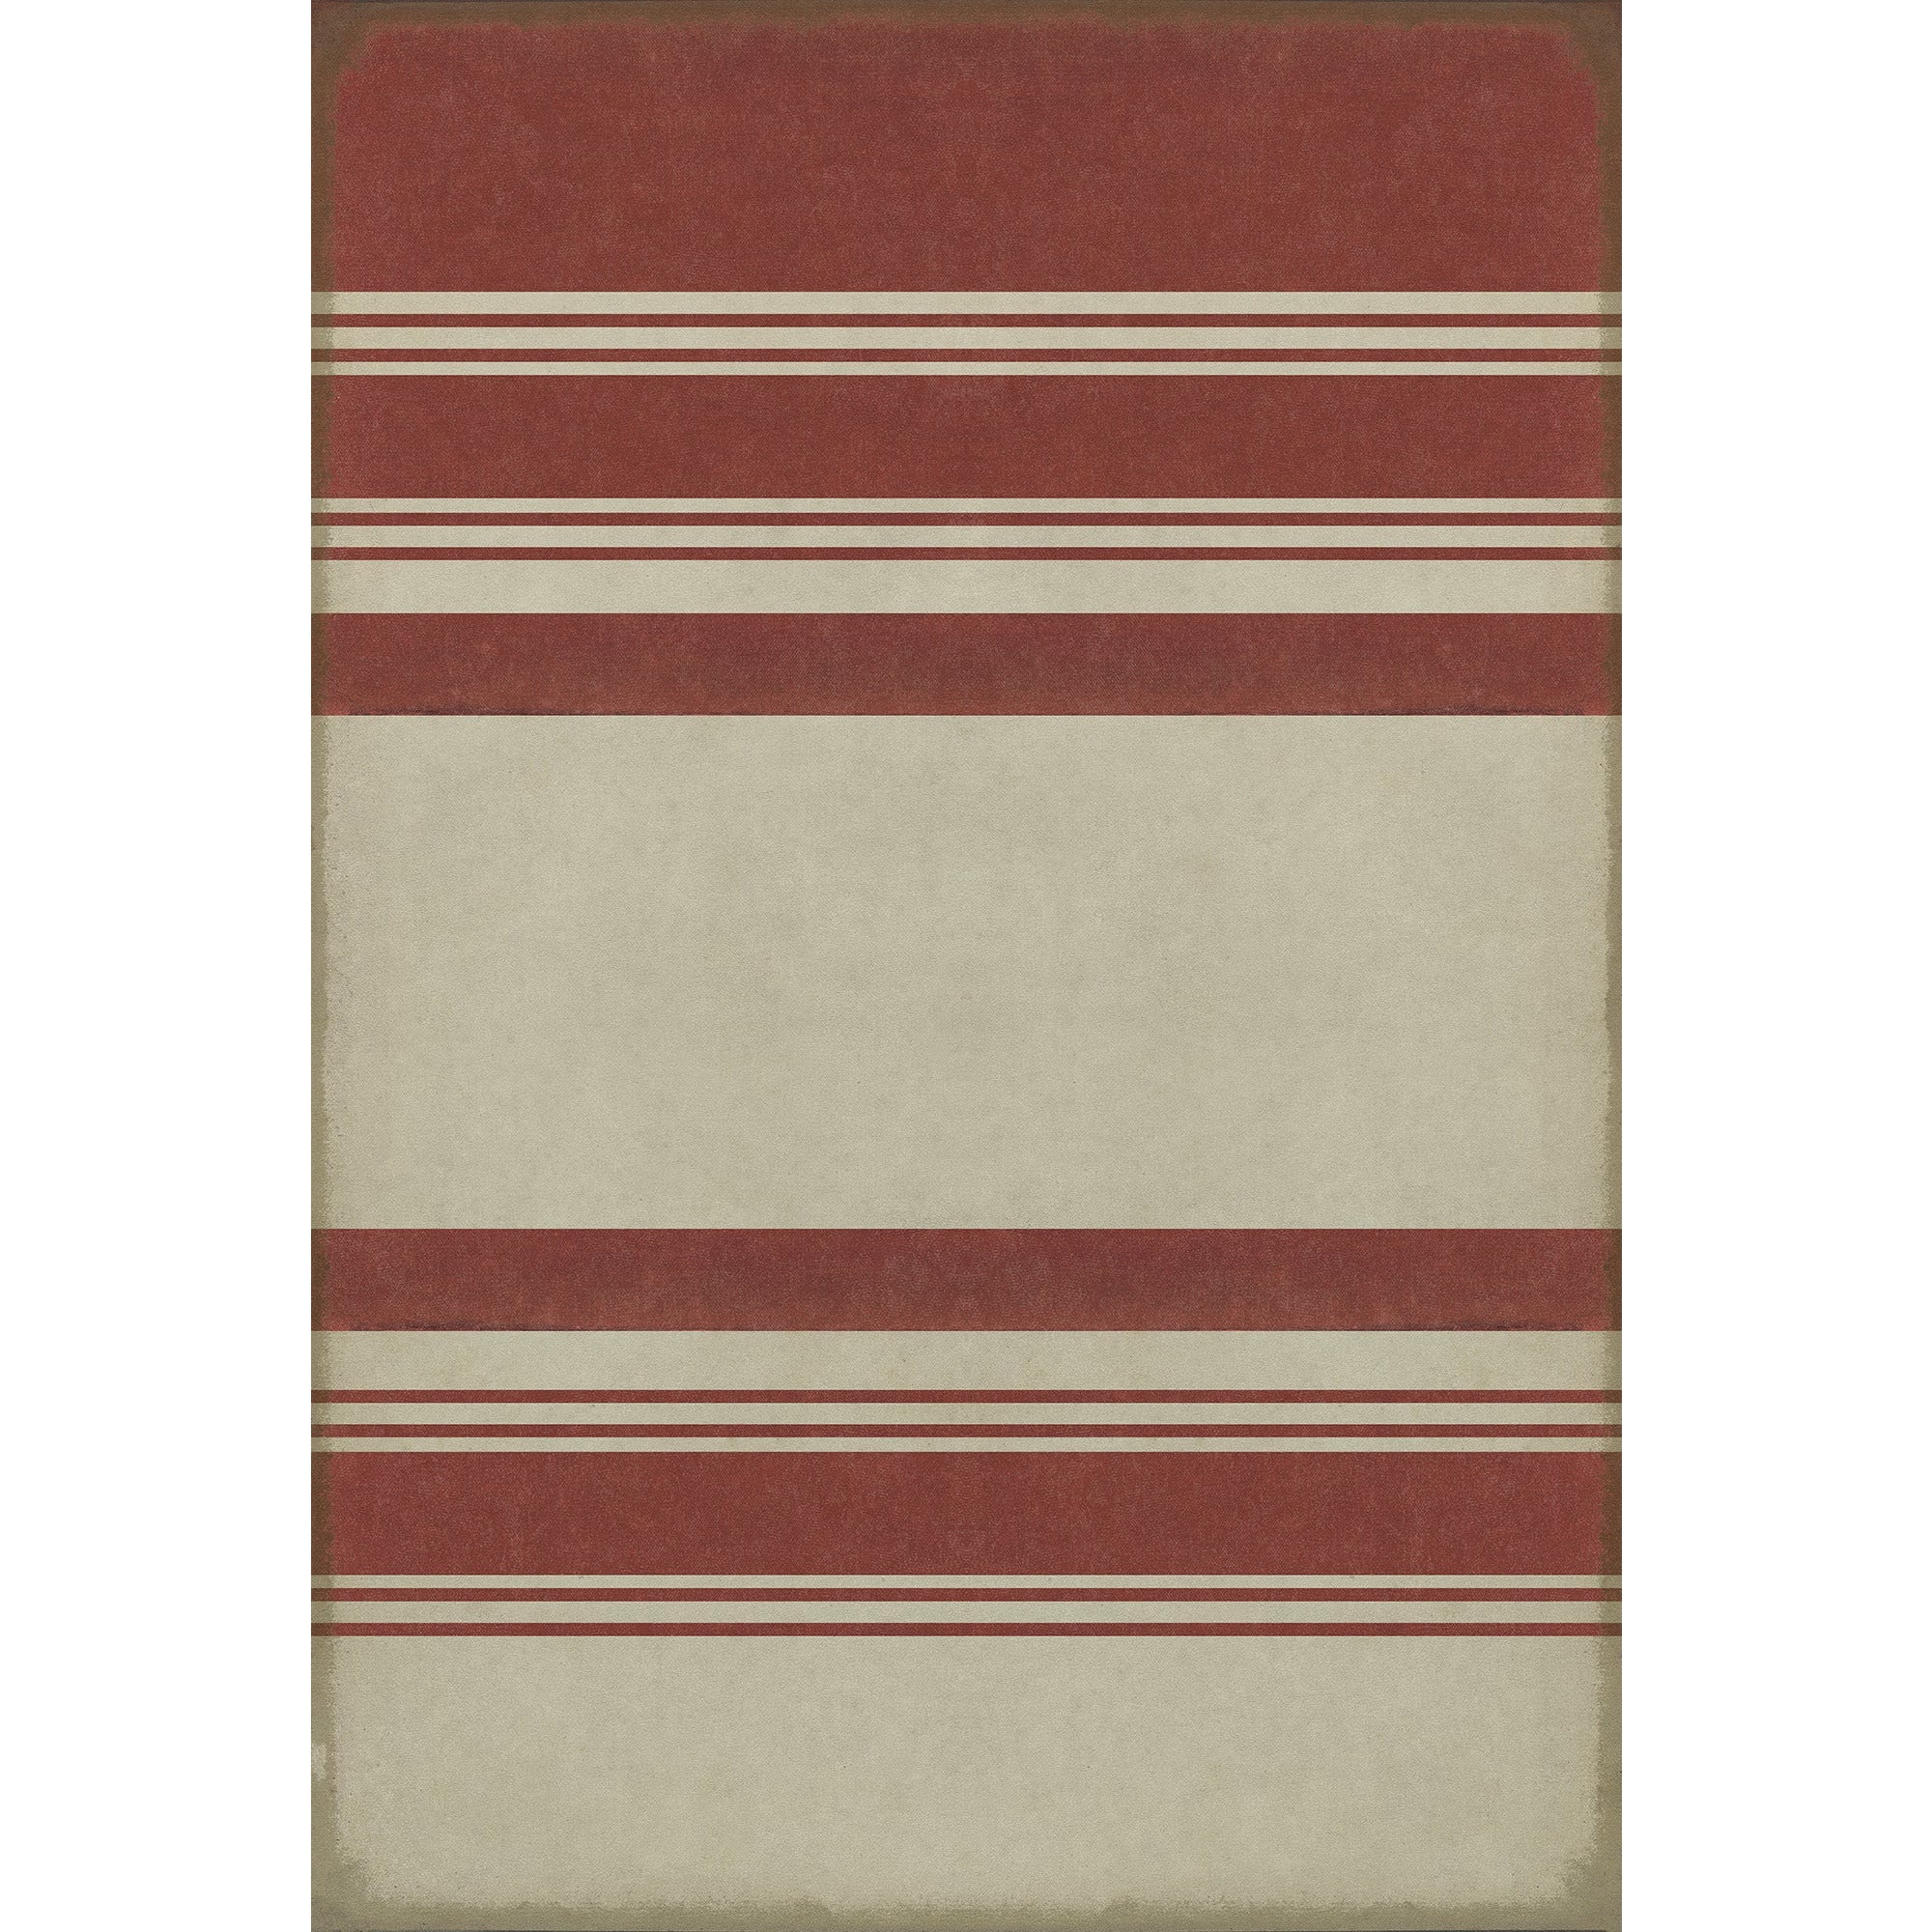 Pattern 50 Organic Stripes Red and White Vinyl Floor Cloth